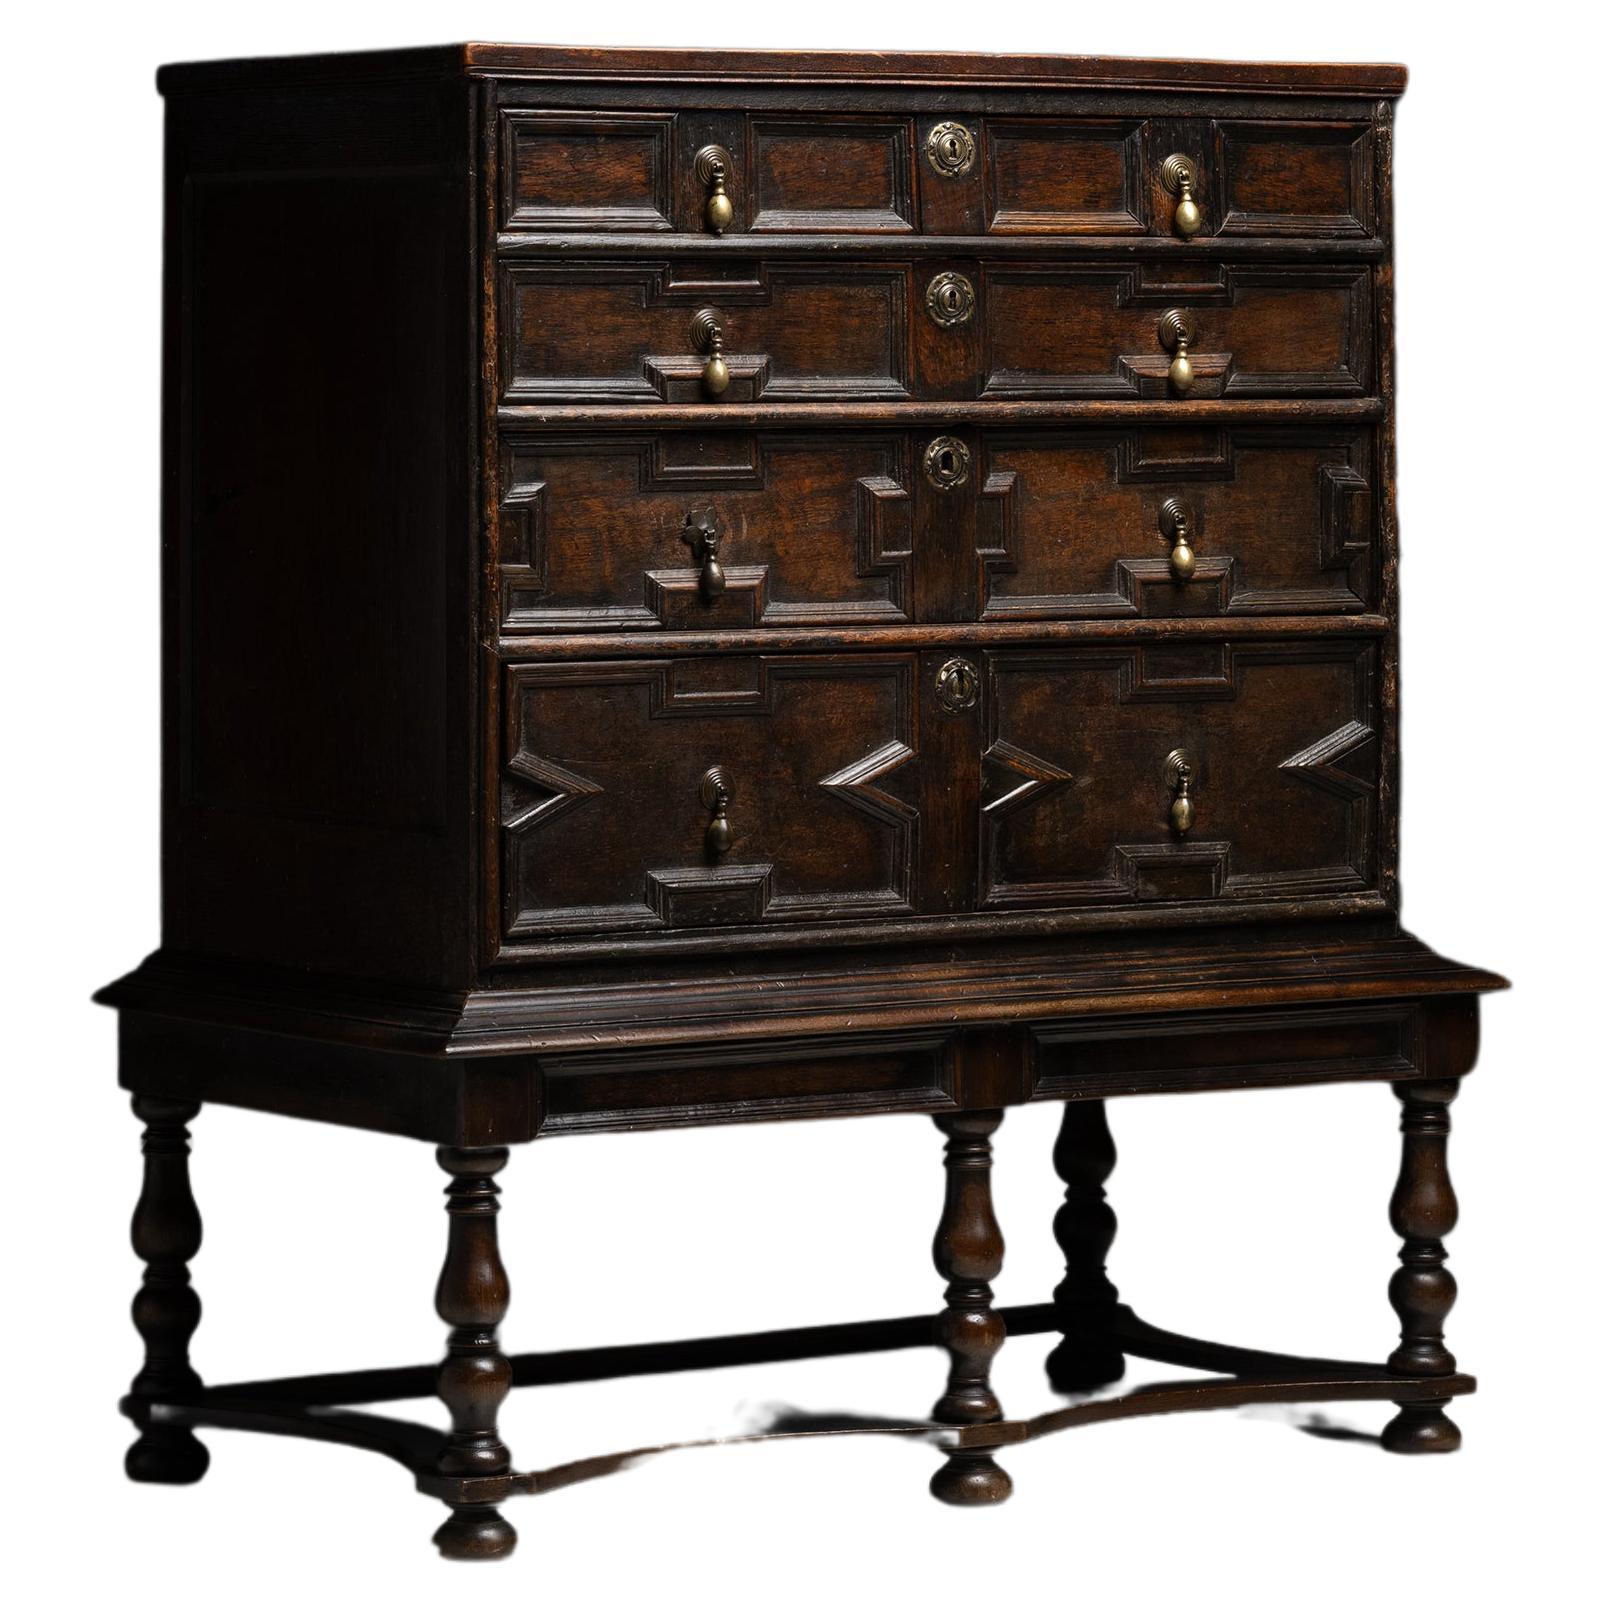 Commode sur Stand, Angleterre vers 1760 en vente